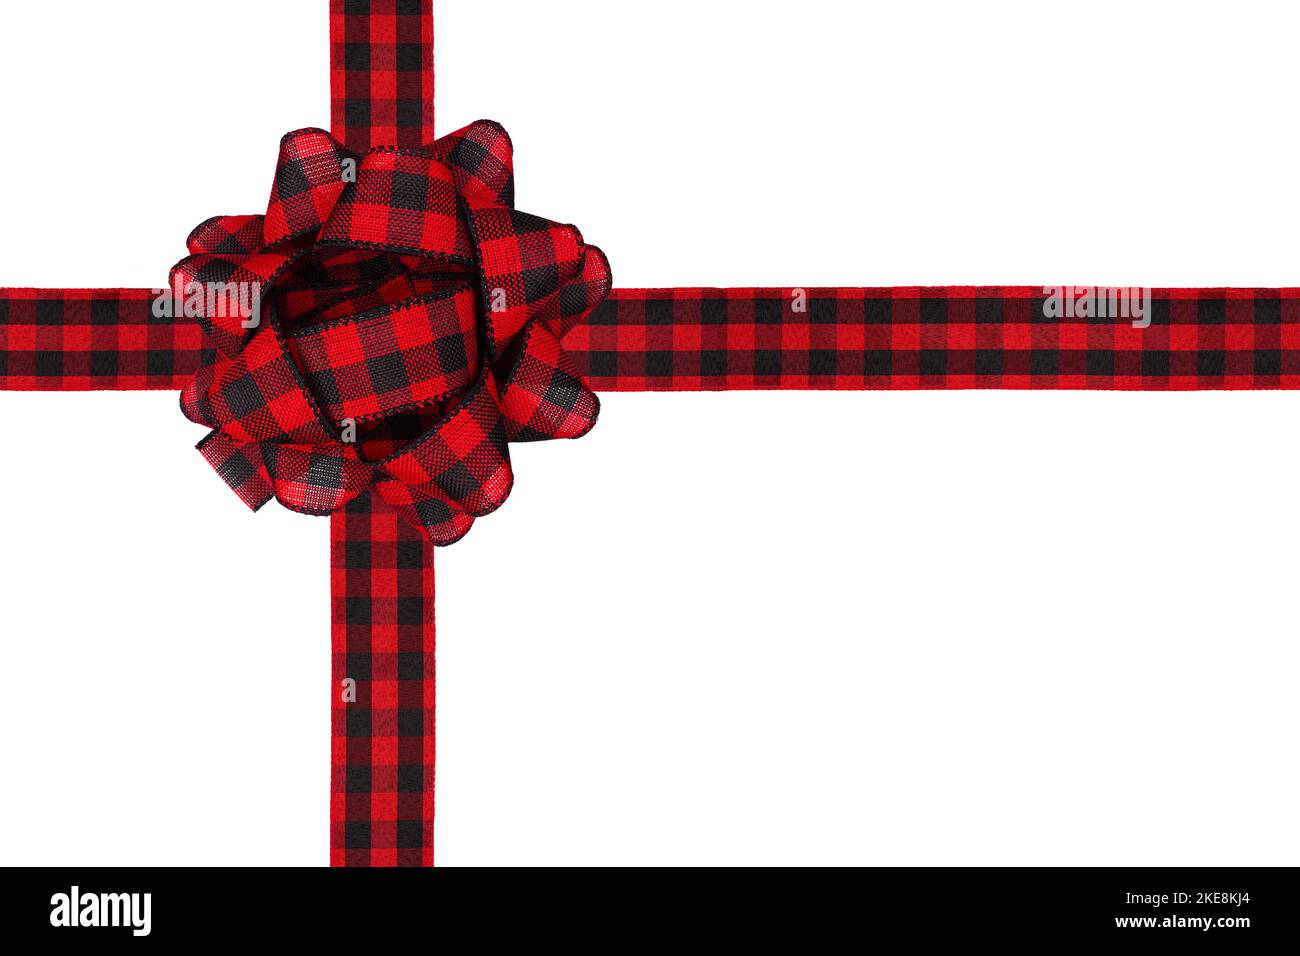 Christmas gift bow and ribbon with red and black buffalo plaid pattern. Box shape isolated on a white background. Stock Photo